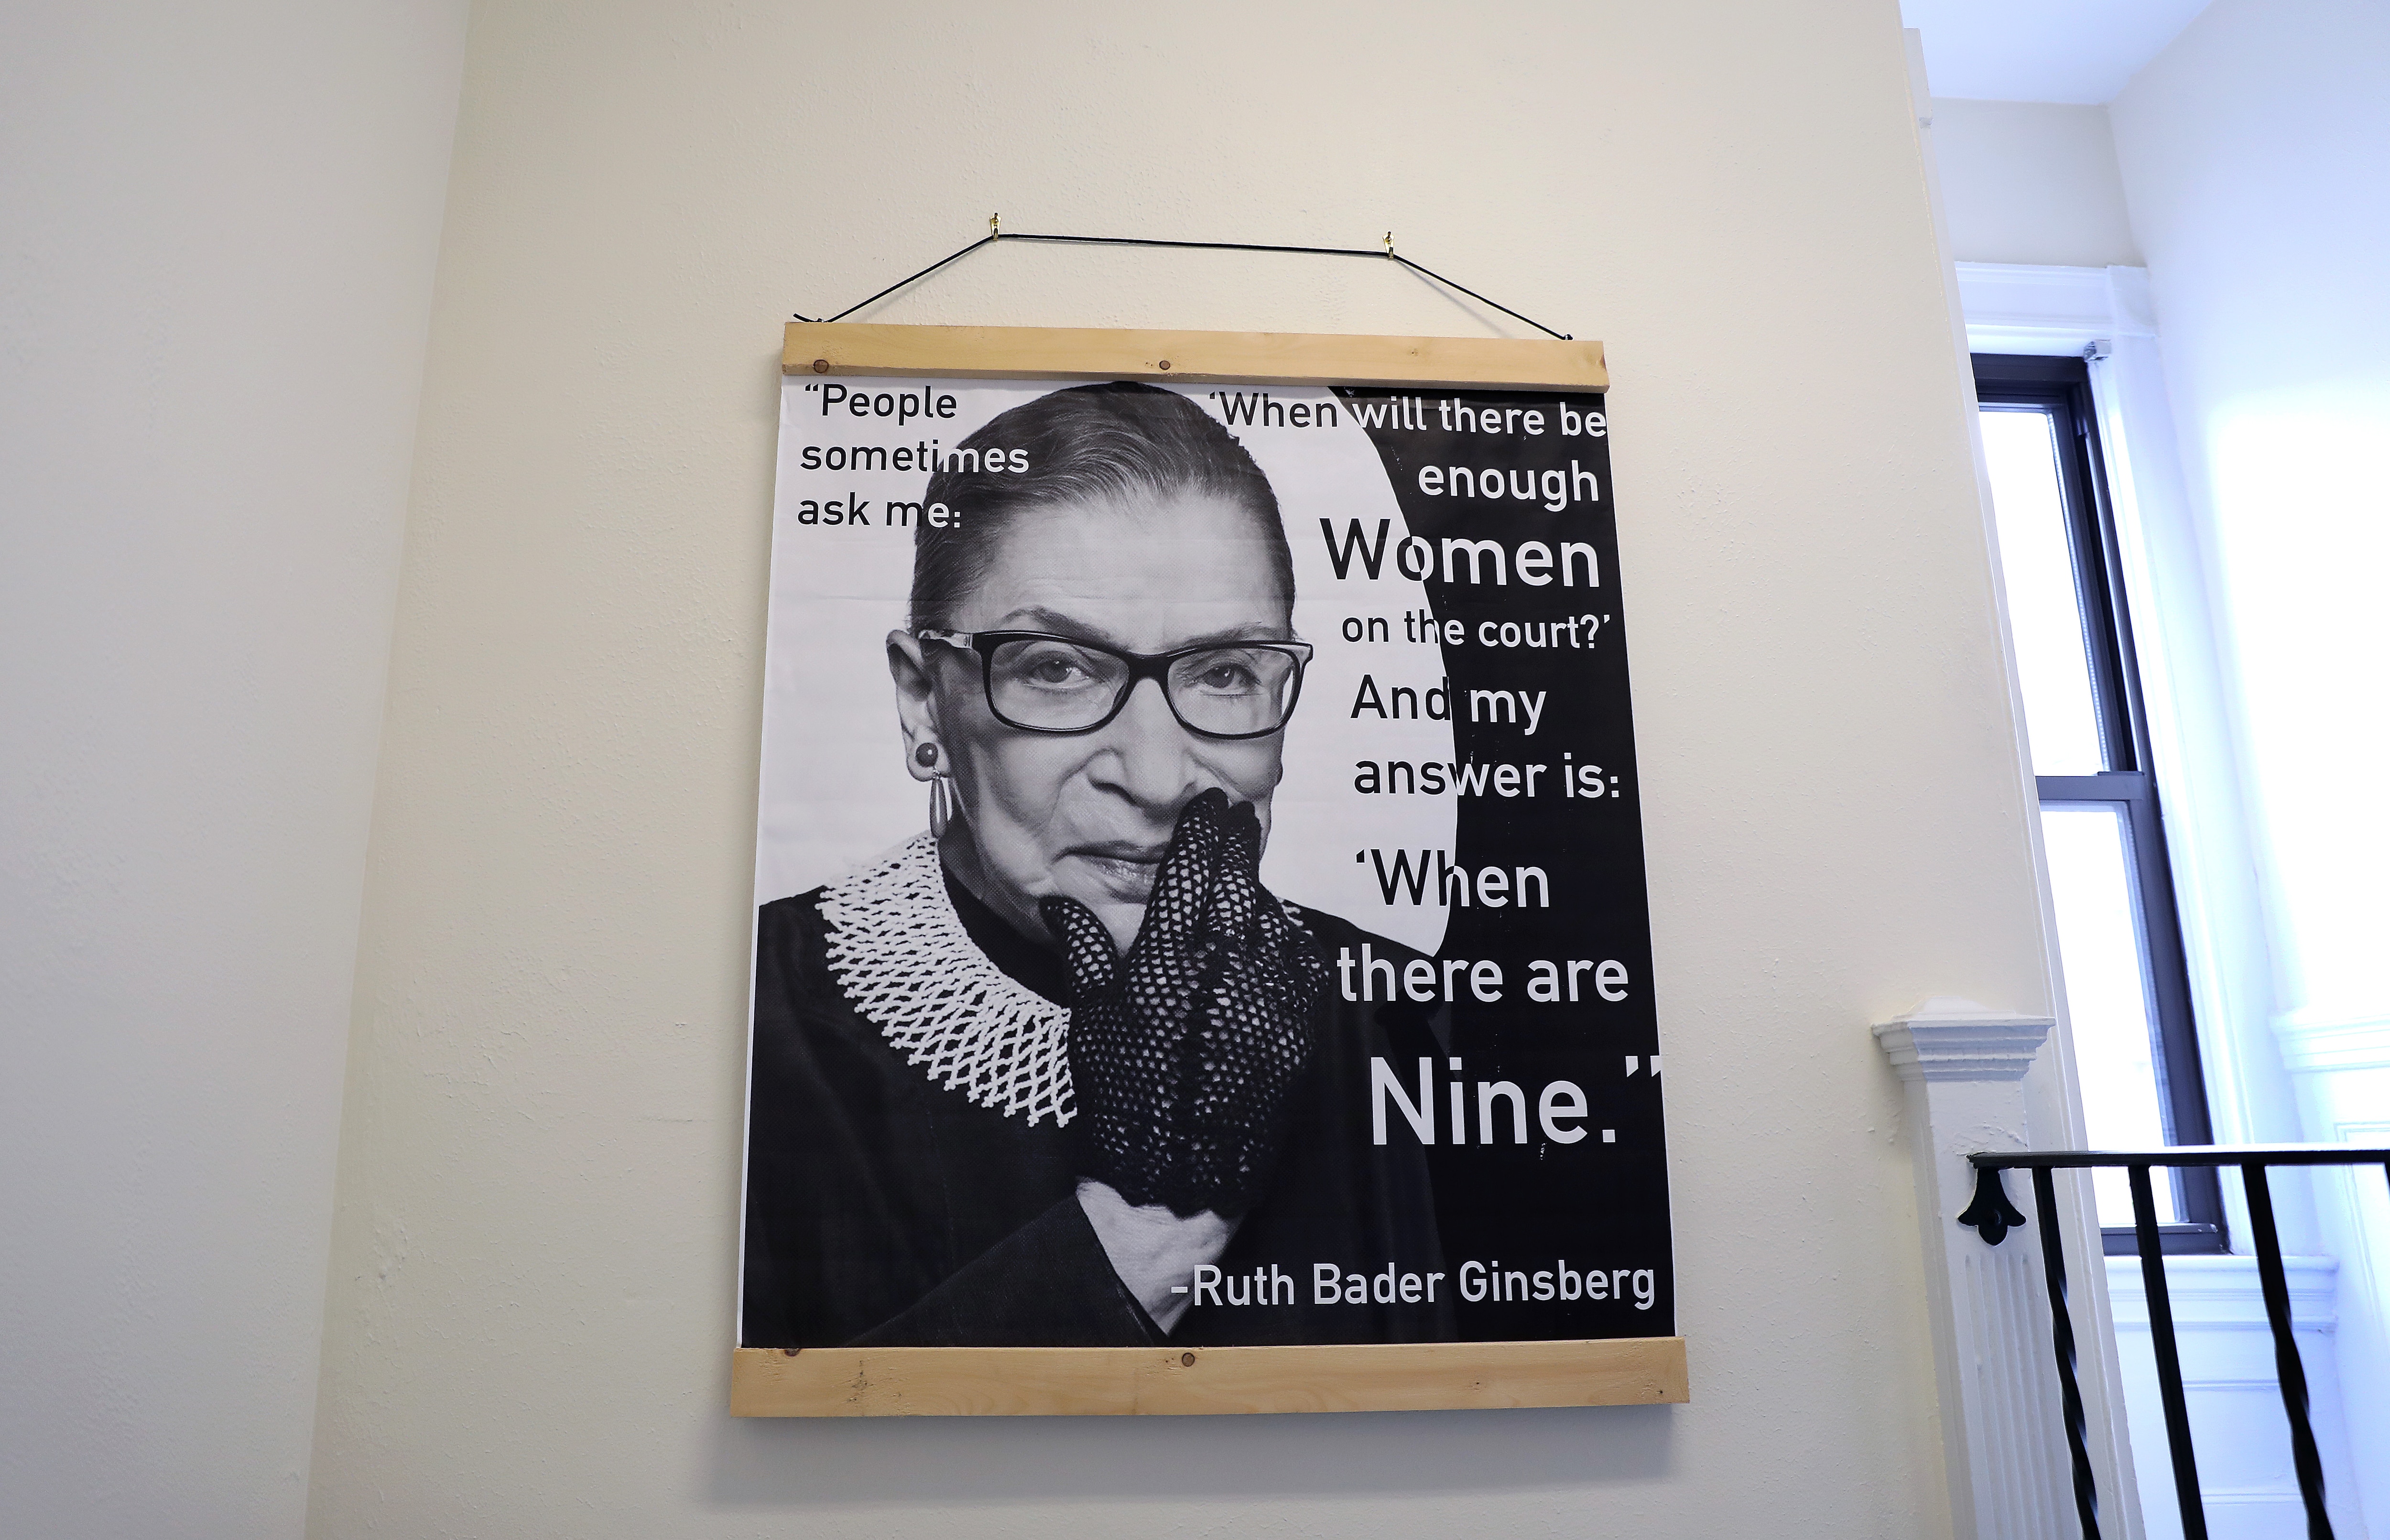 Justice Ginsberg was the second female justice, after Sandra Day O'Connor, to be named to the highest court. 